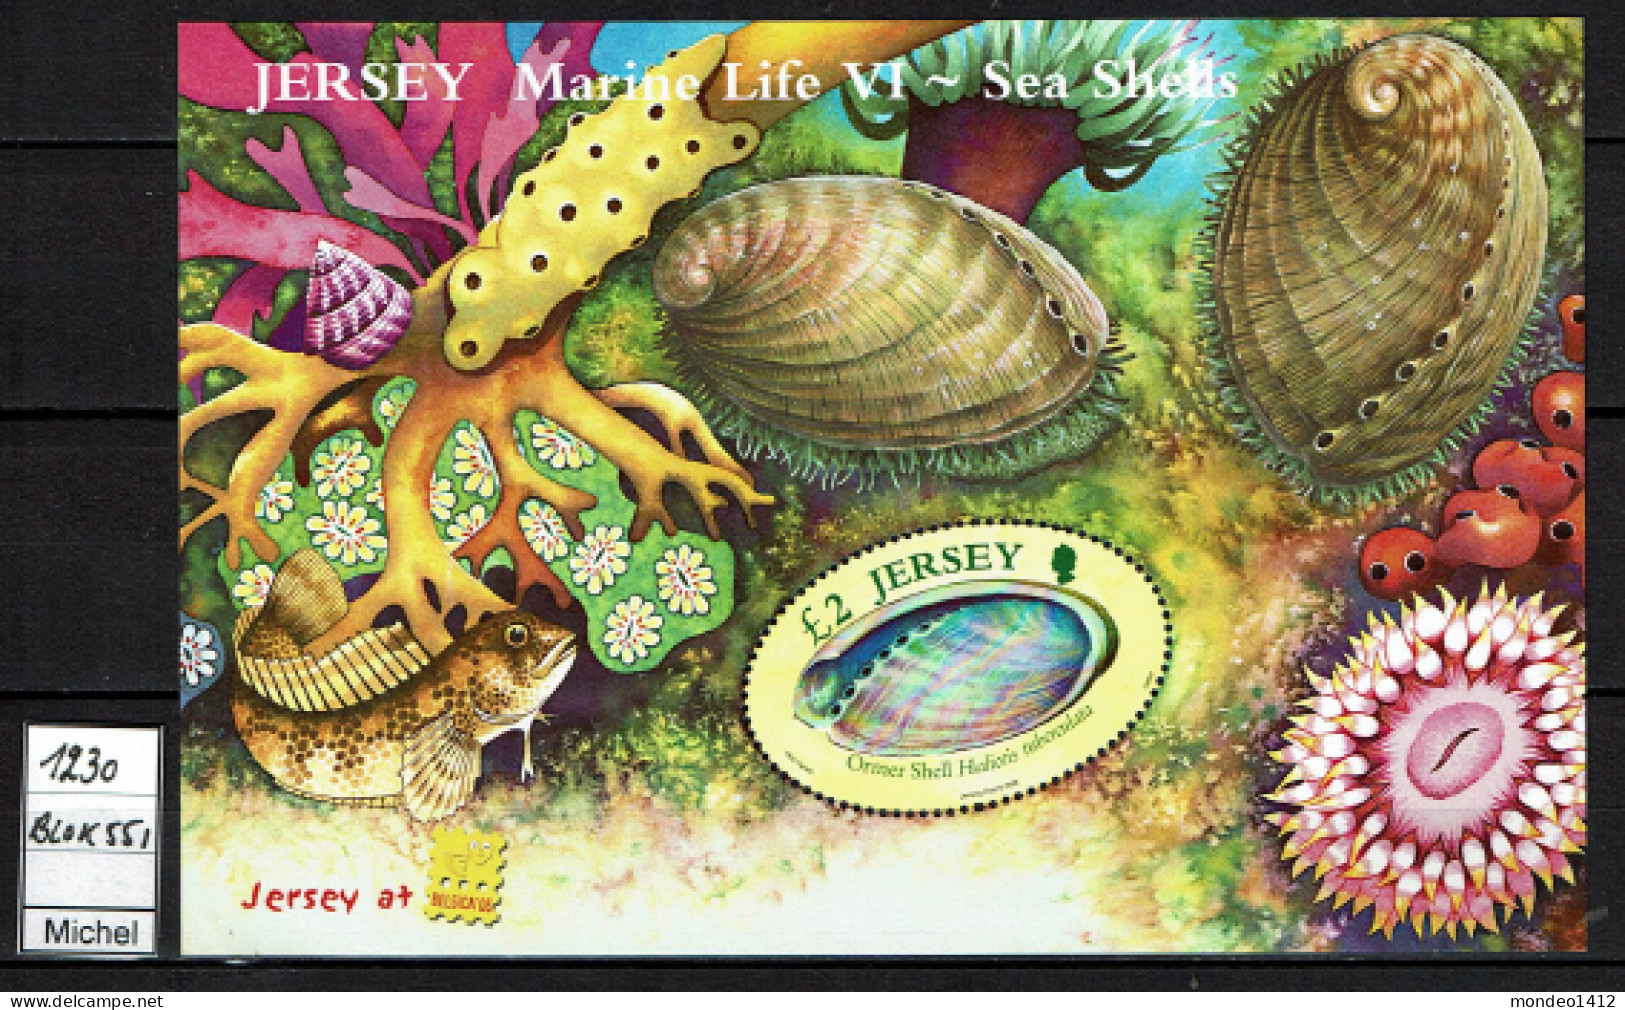 Jersey - 2006 - MNH - Sea Shells, Coquillages - International Stamp Exhibition BELGICA 06 LOGO - Jersey